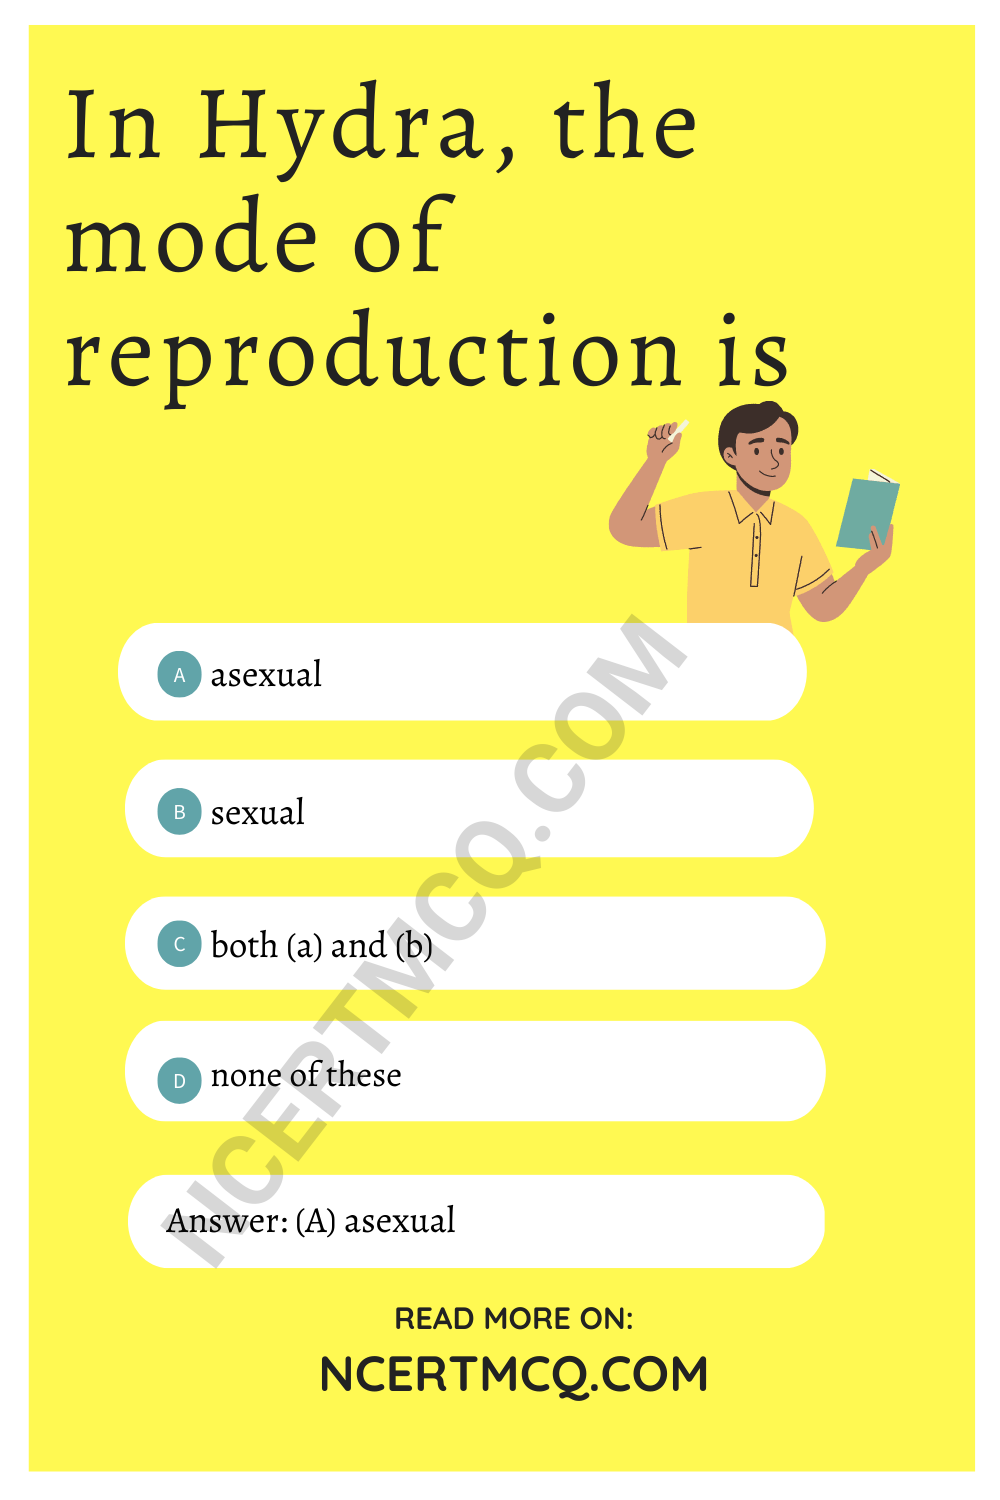 In Hydra, the mode of reproduction is